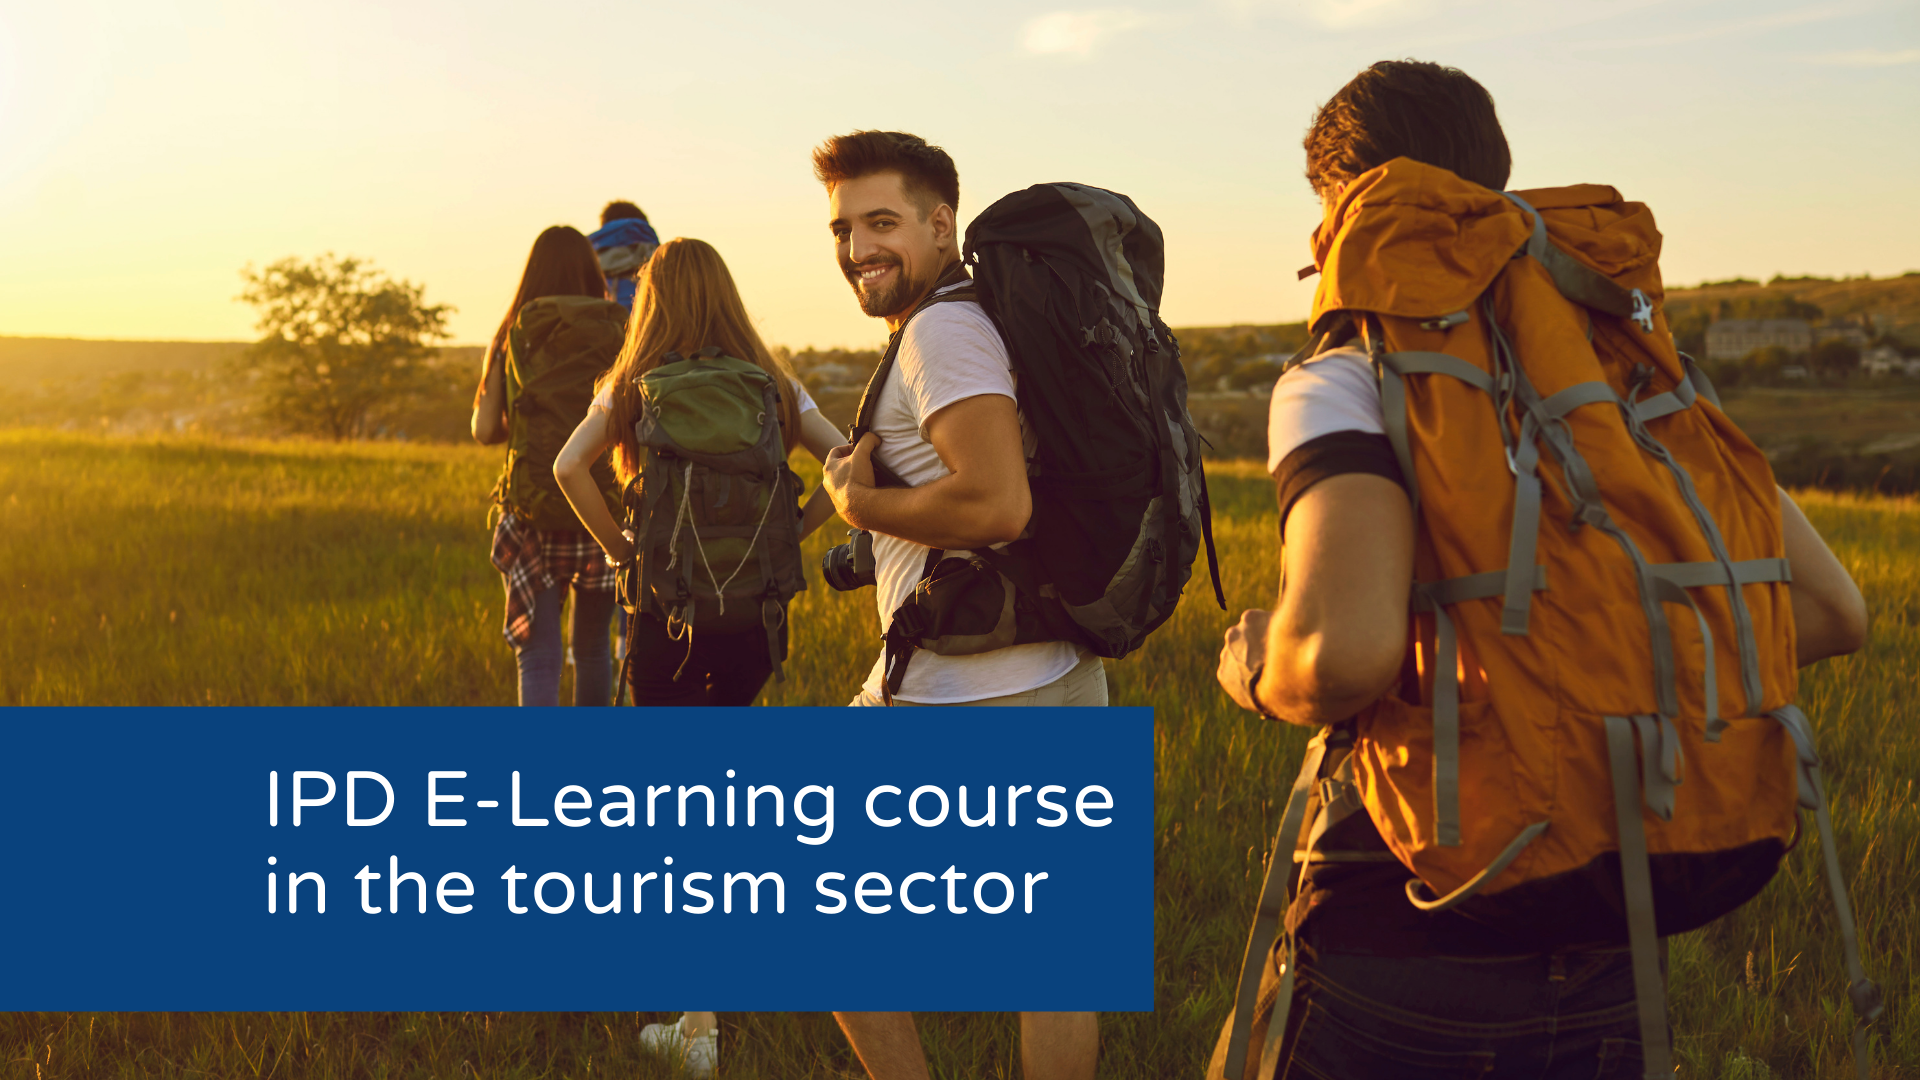 IPD E-Learning course in the tourism sector